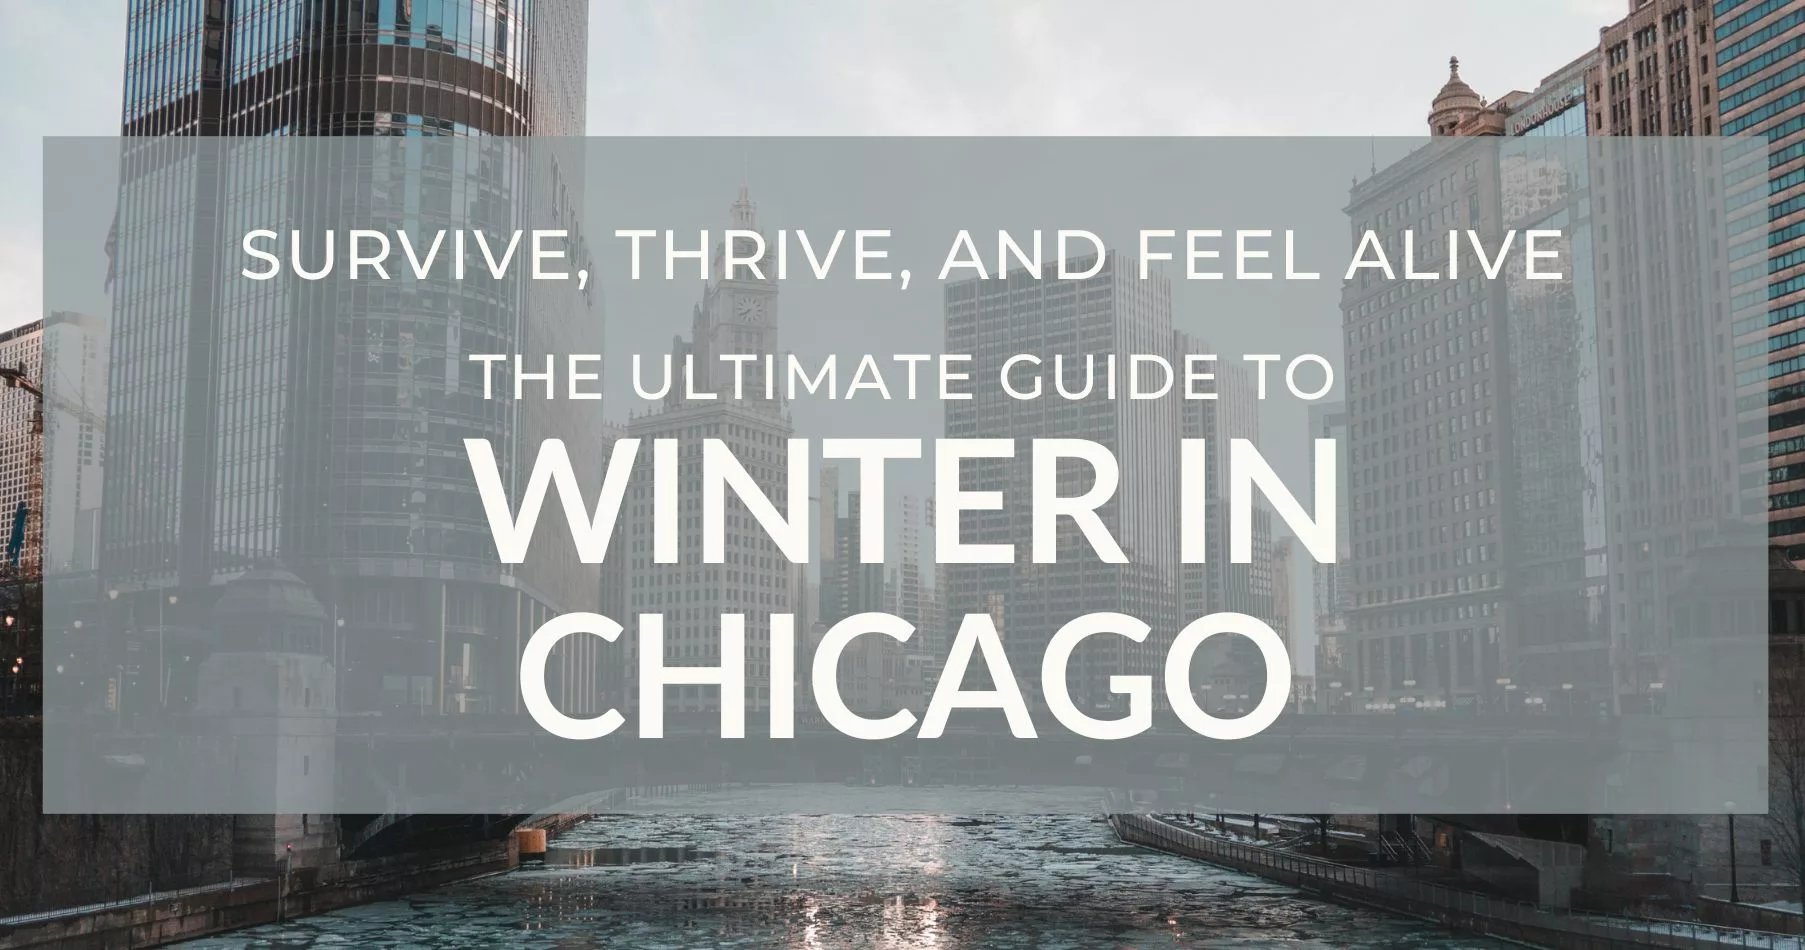 Downtown Chicago with the text The Ultimate Guide to Winter in Chicago